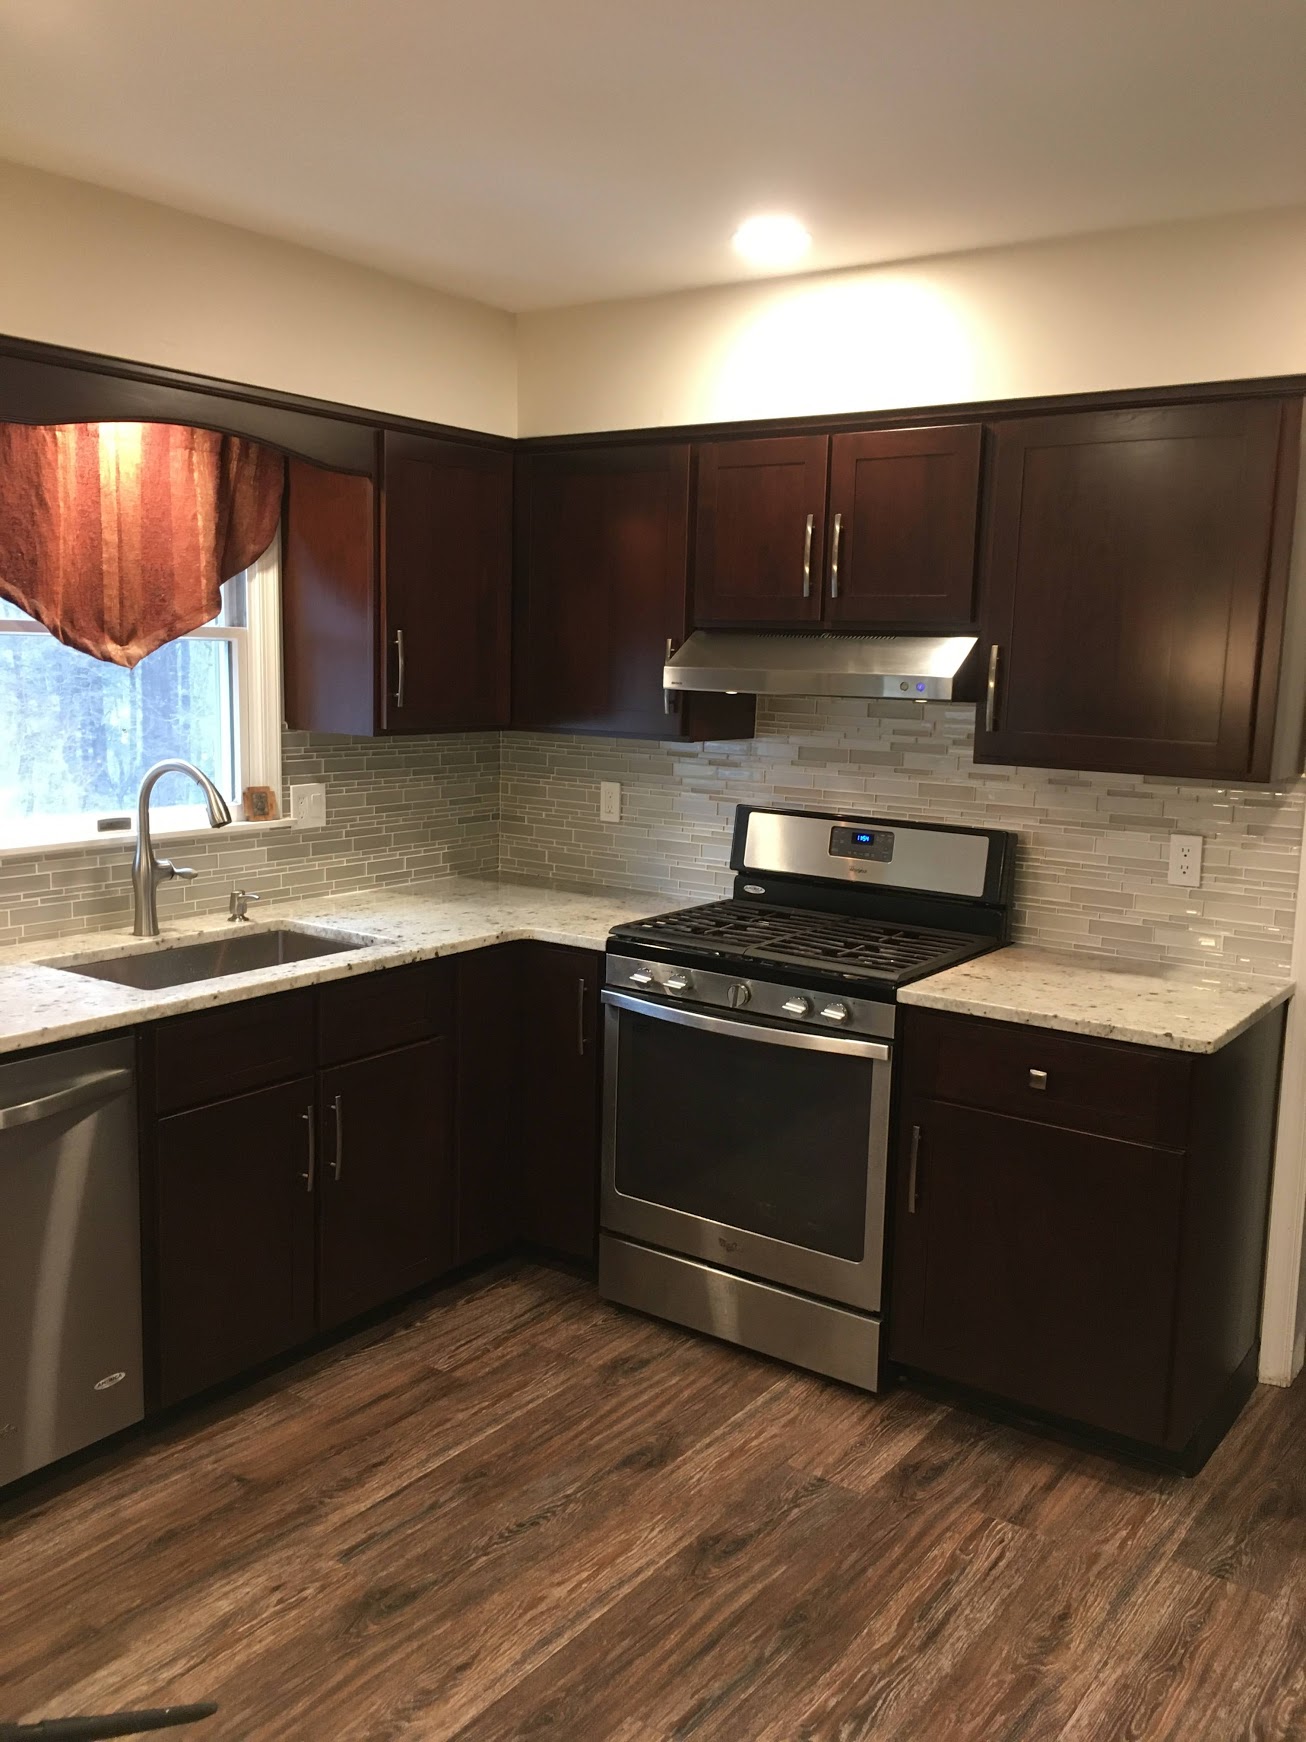 Beautiful kitchen cabinet refacing in Langhorne, PA with shaker style door and drawer fronts. The cabinetry is a cherrywood stained in a dark red wine hue. Quartz countertops, a stunning tile back splash and silver hardware wonderfully accent the new look.